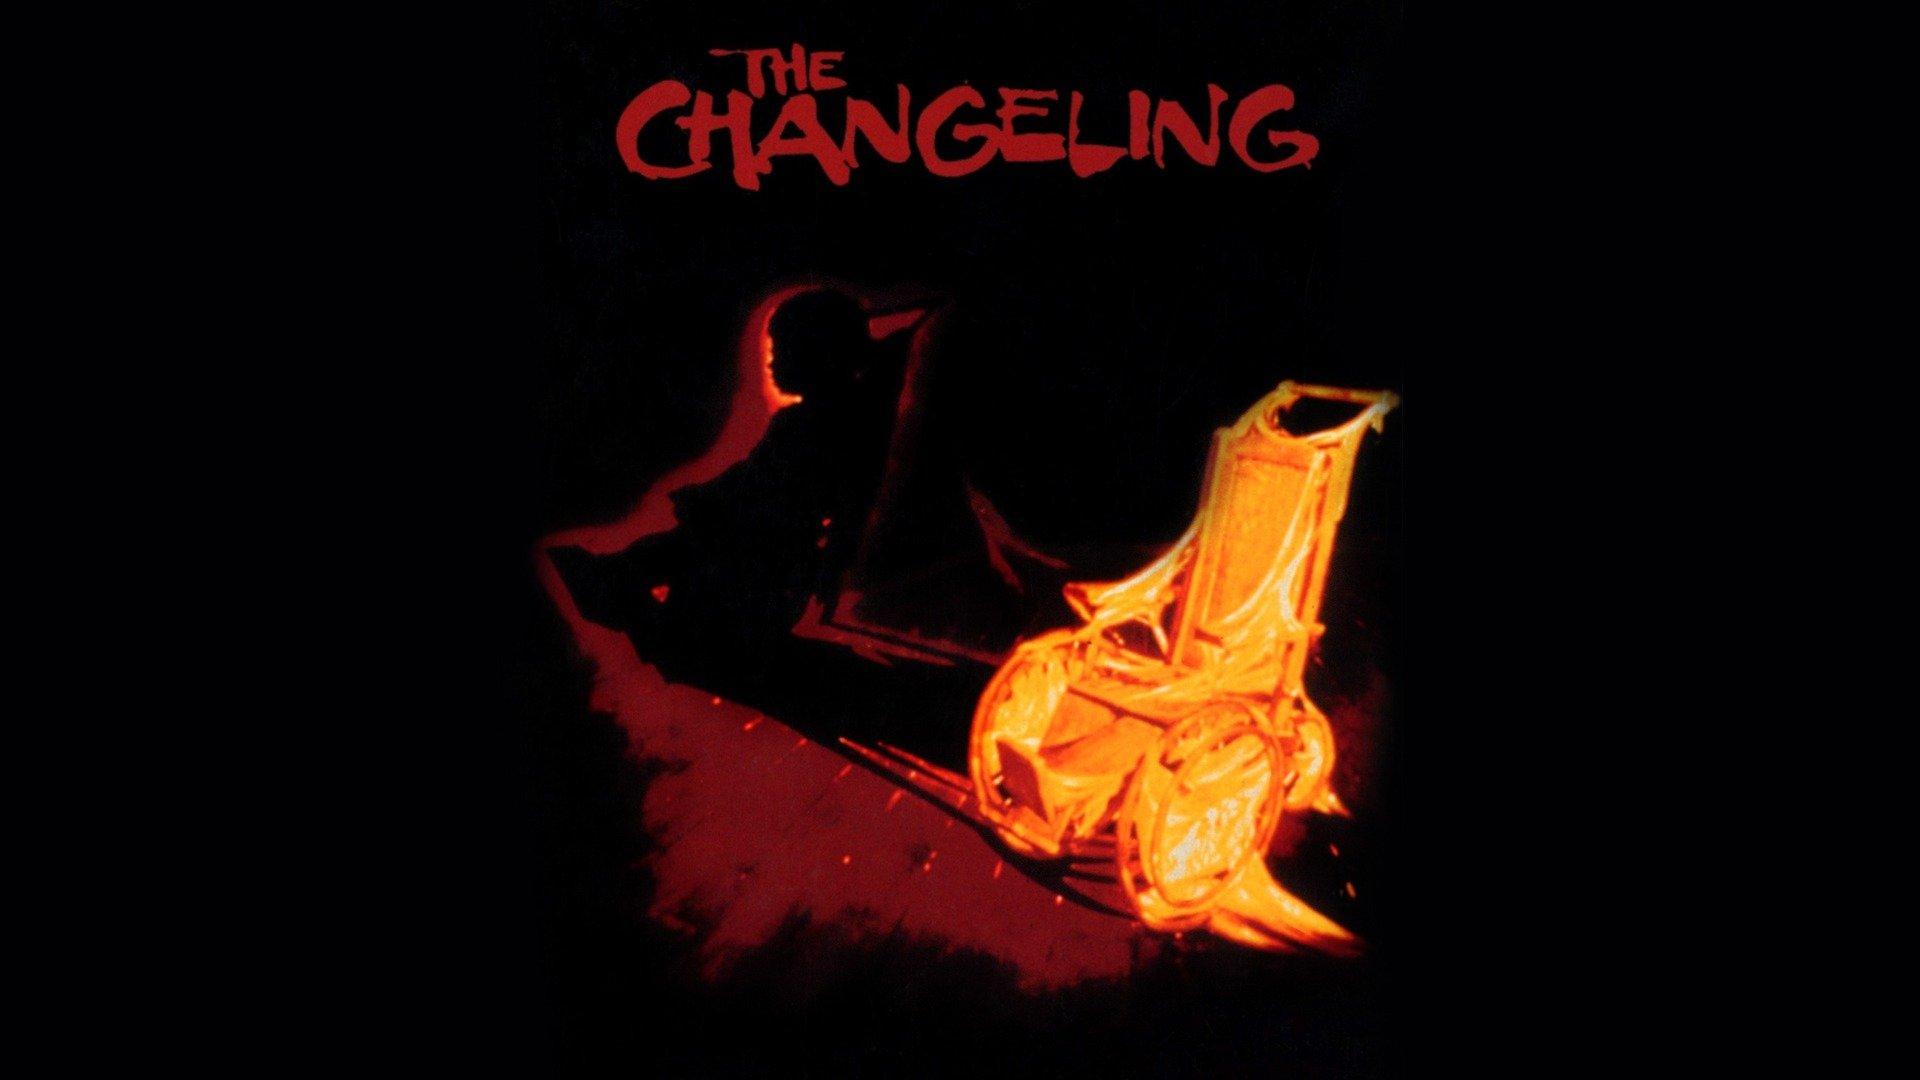 Watch The Changeling Streaming Online on Philo (Free Trial)